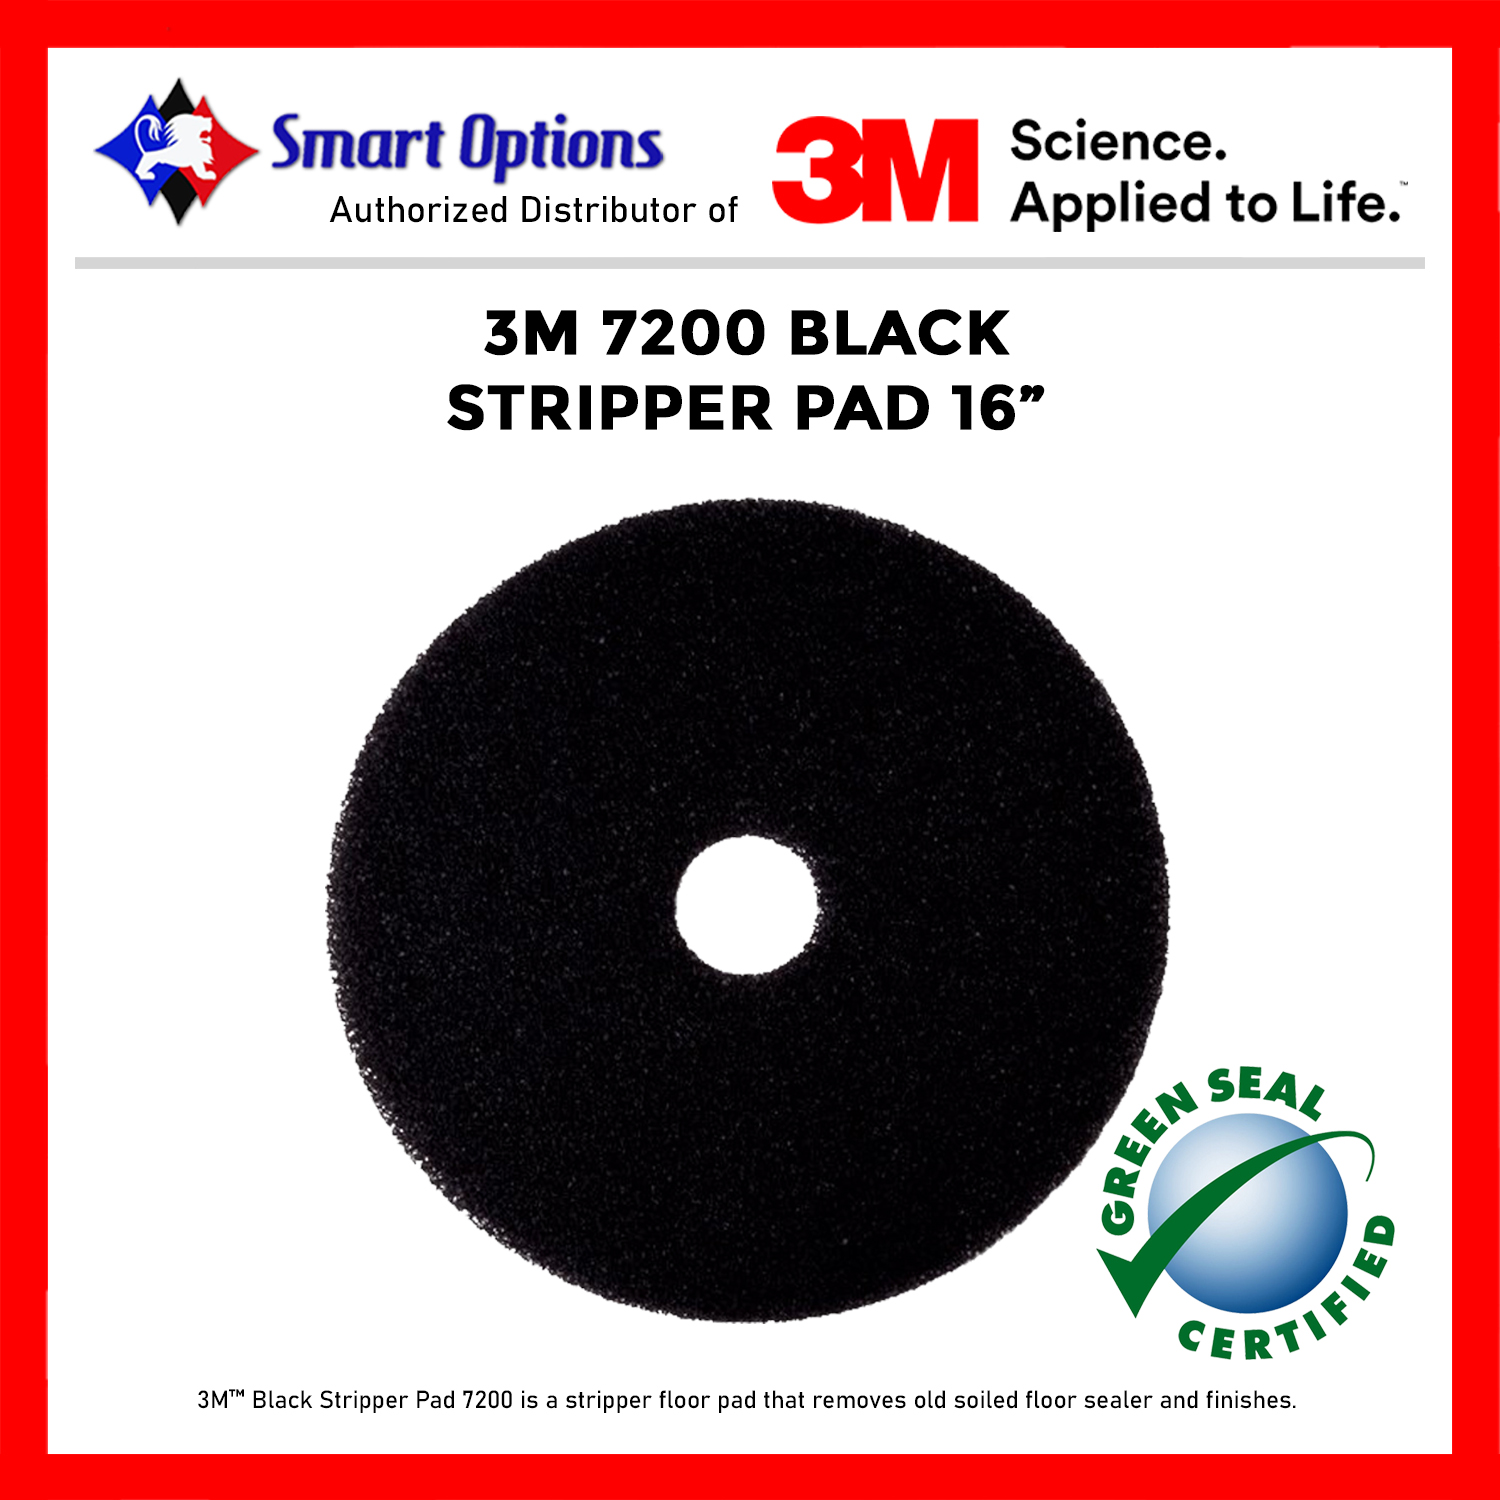 Cheap Good Goods Free Shipping And Return Give You More Choice 12 In 3m Black Stripper Pad 7200